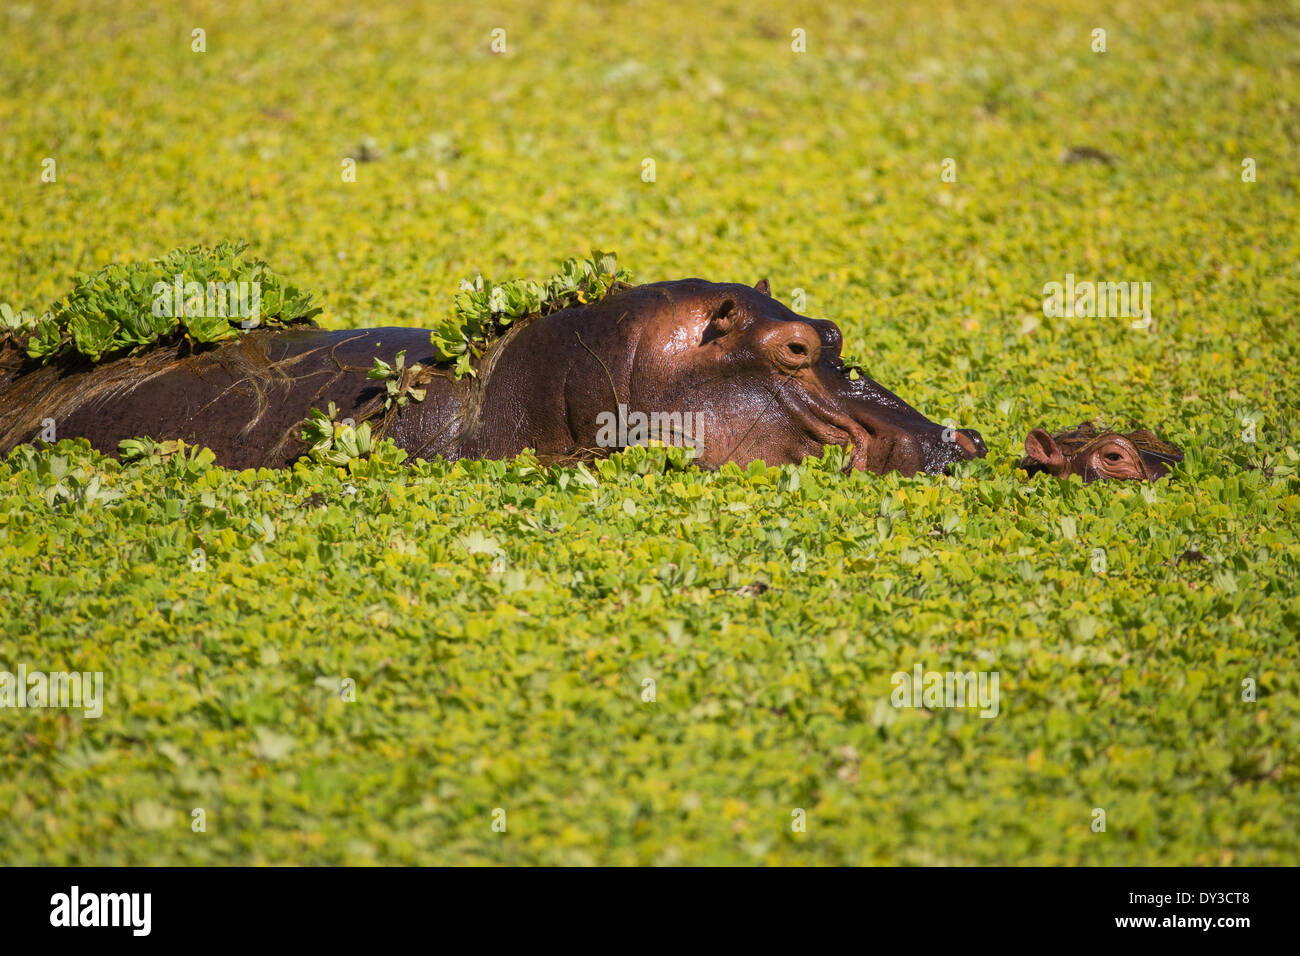 Hippopotamus mother and calf in pond covered with Hyacinth weed Stock Photo